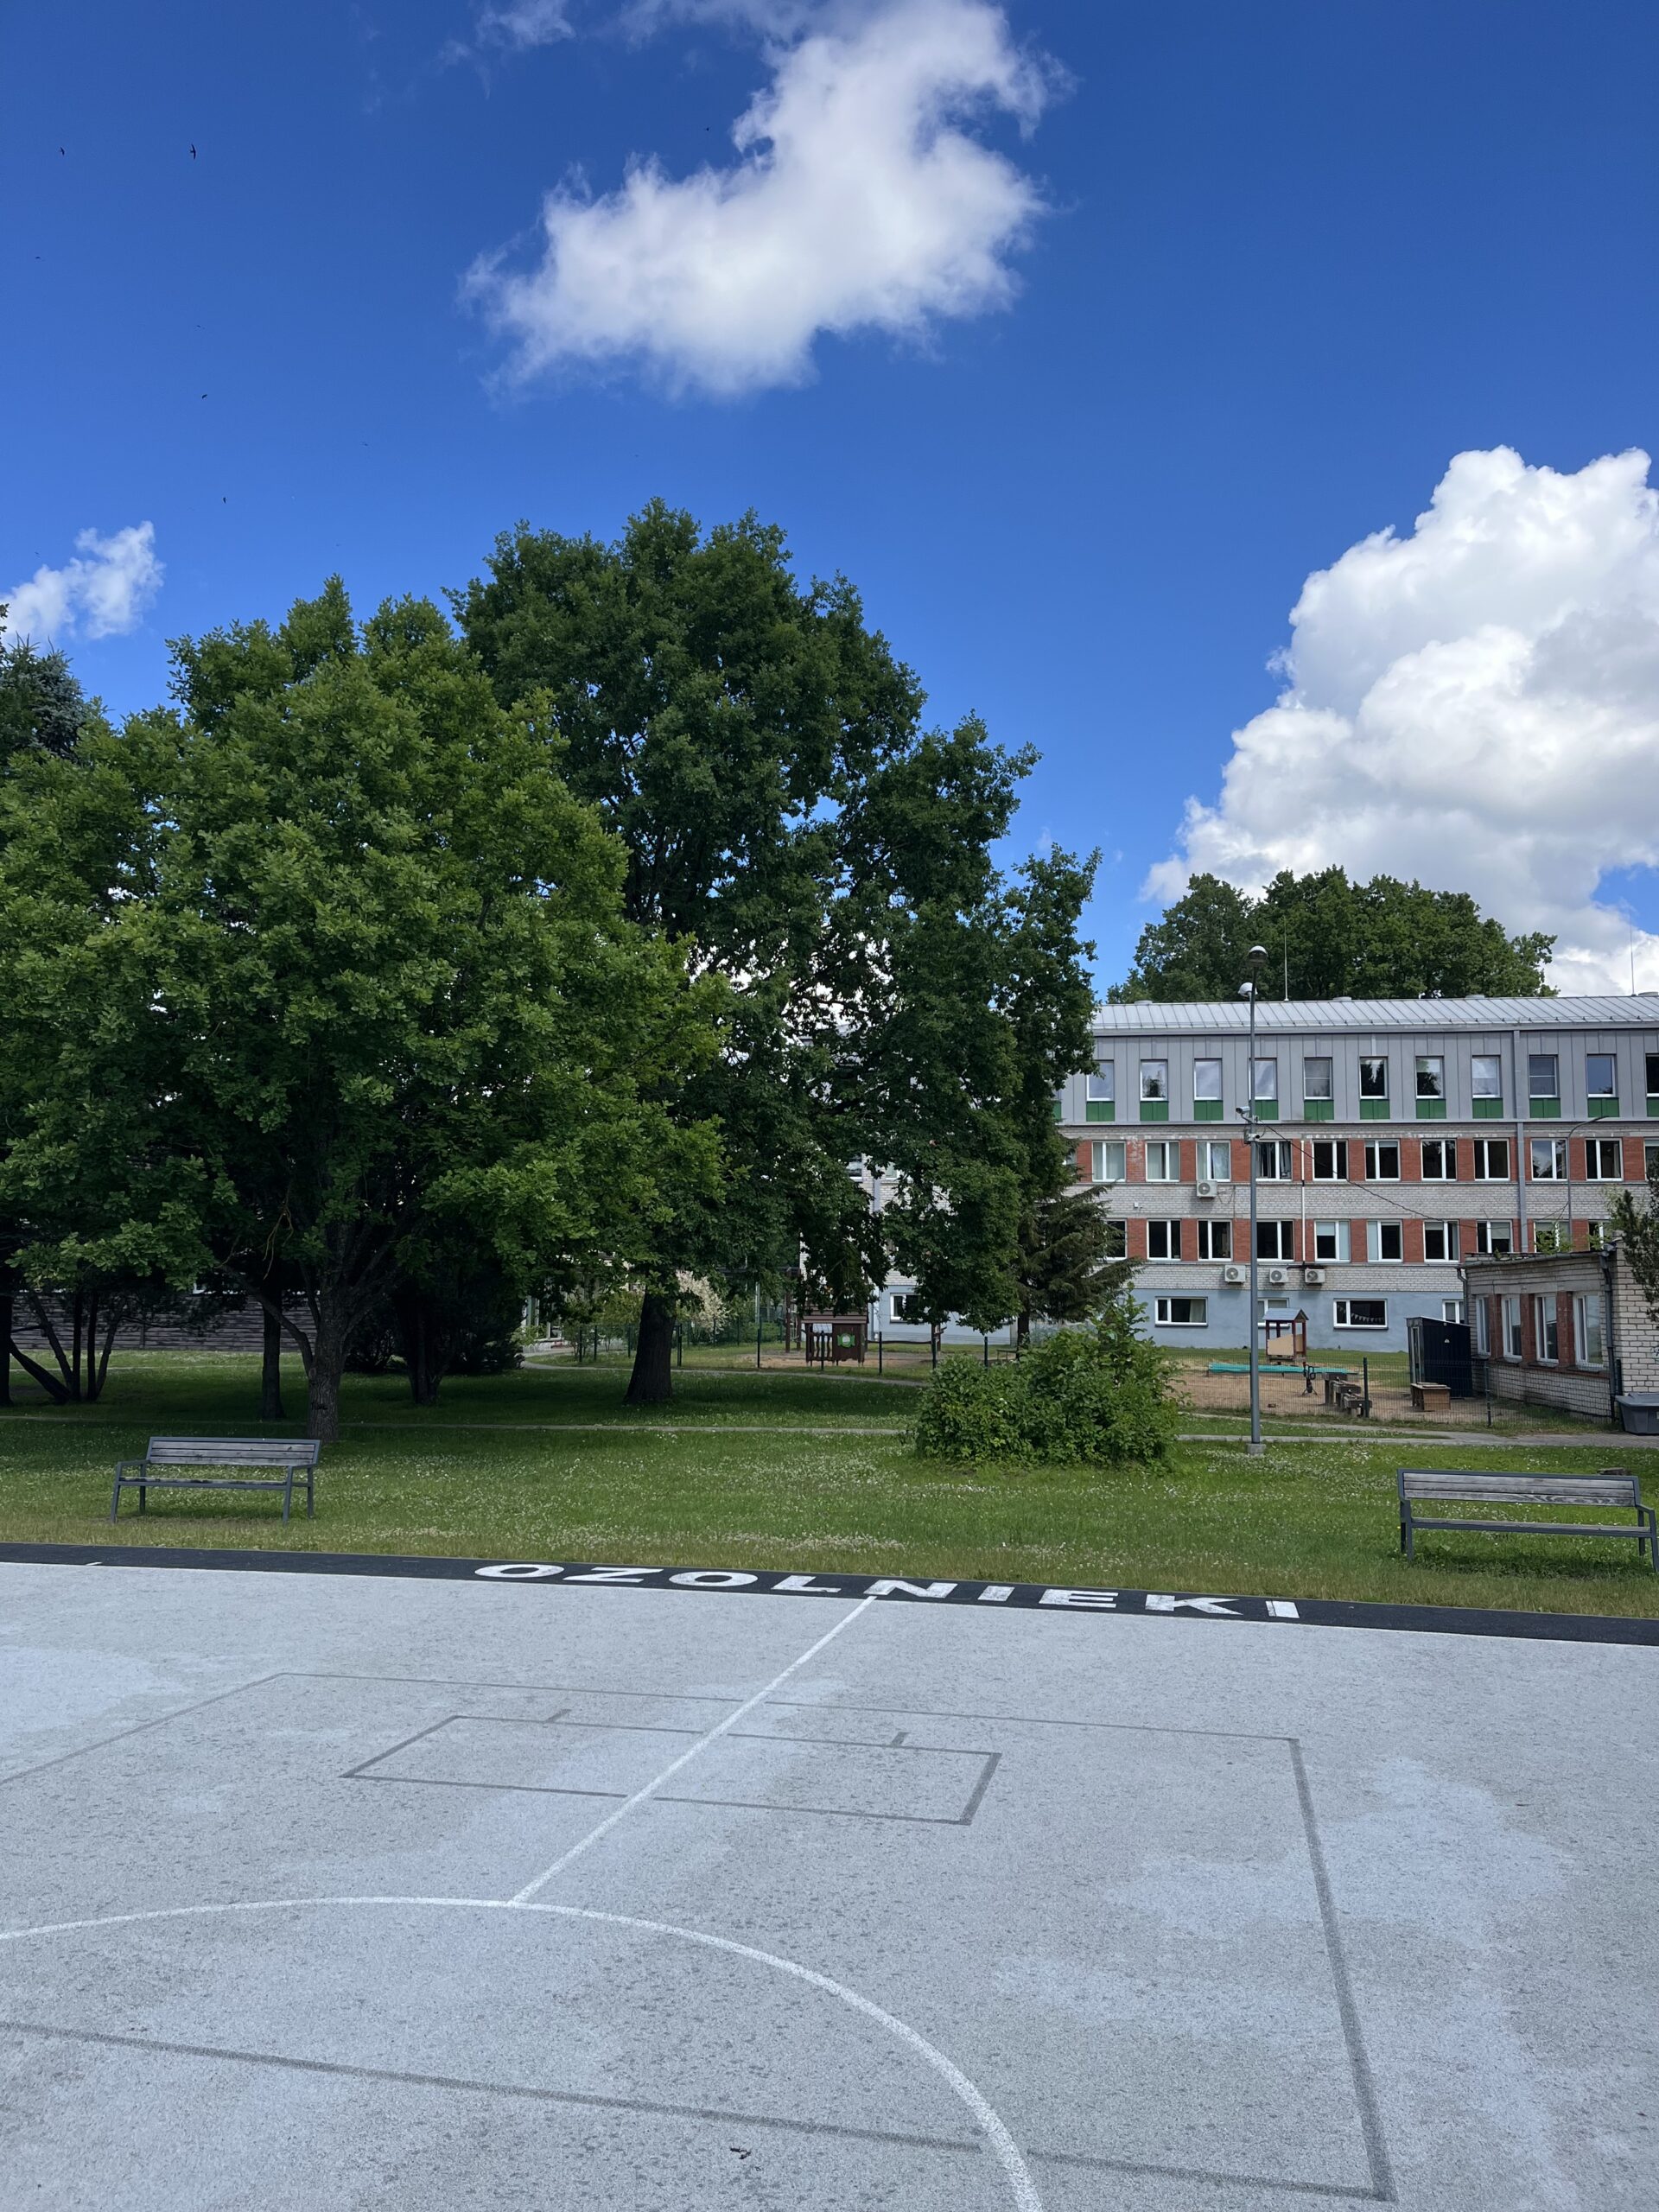 Outside view of Ozolnieki Secondary School and oak trees from the basketball courts in Ozolnieki, Latvia.